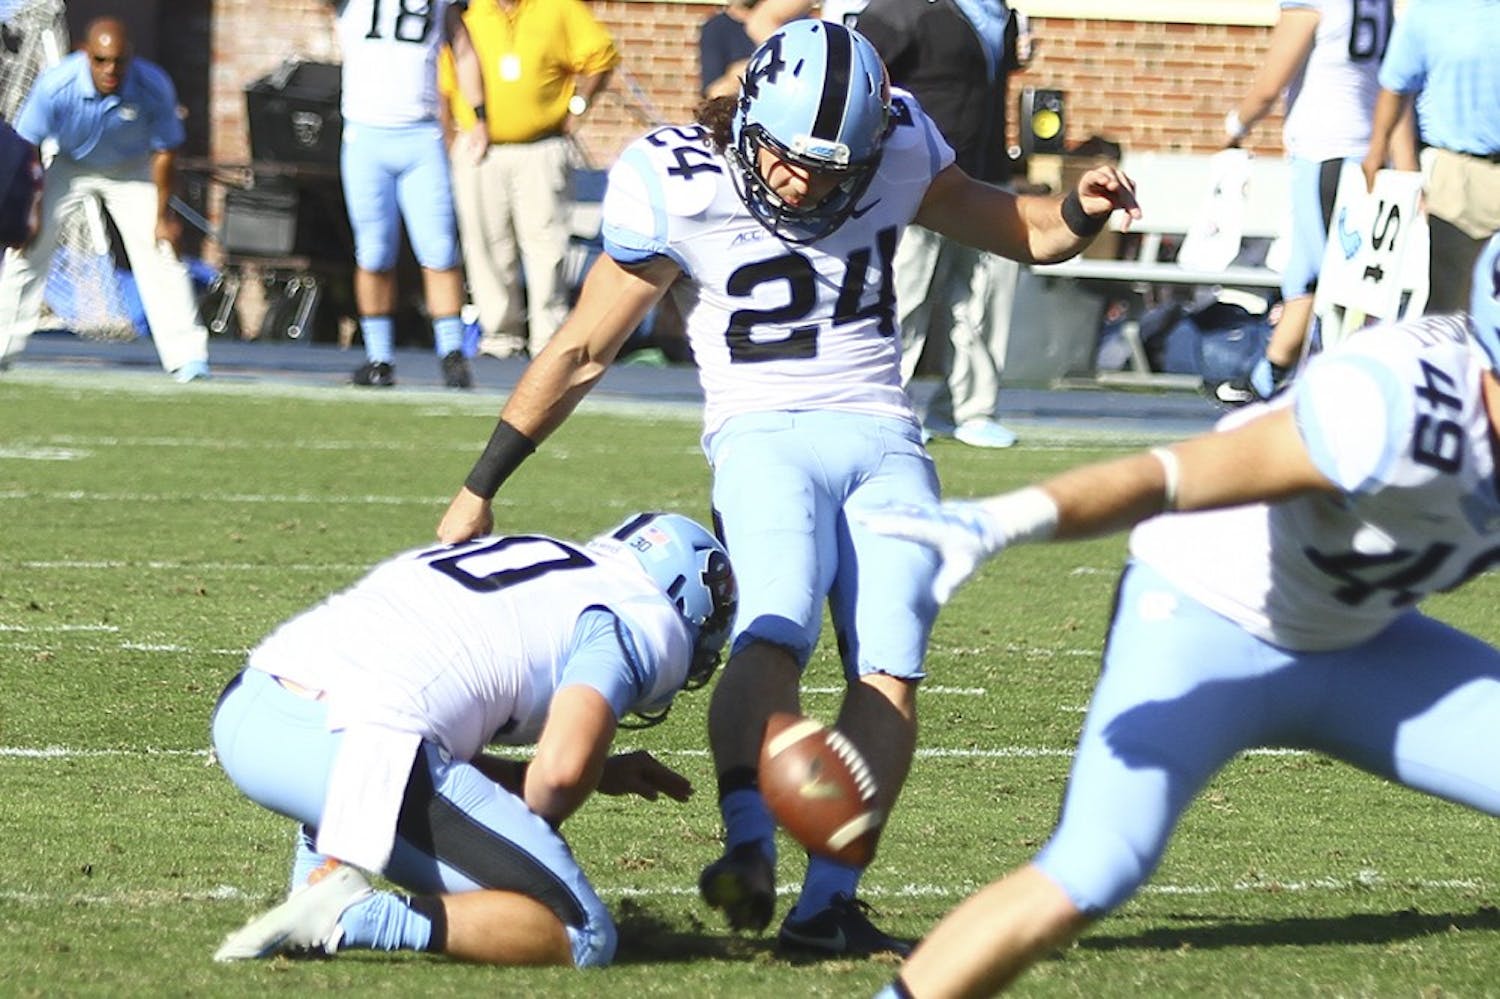 North Carolina kicker Nick Weiler (24) makes a field goal attempt. He is fighting for a starting spot.